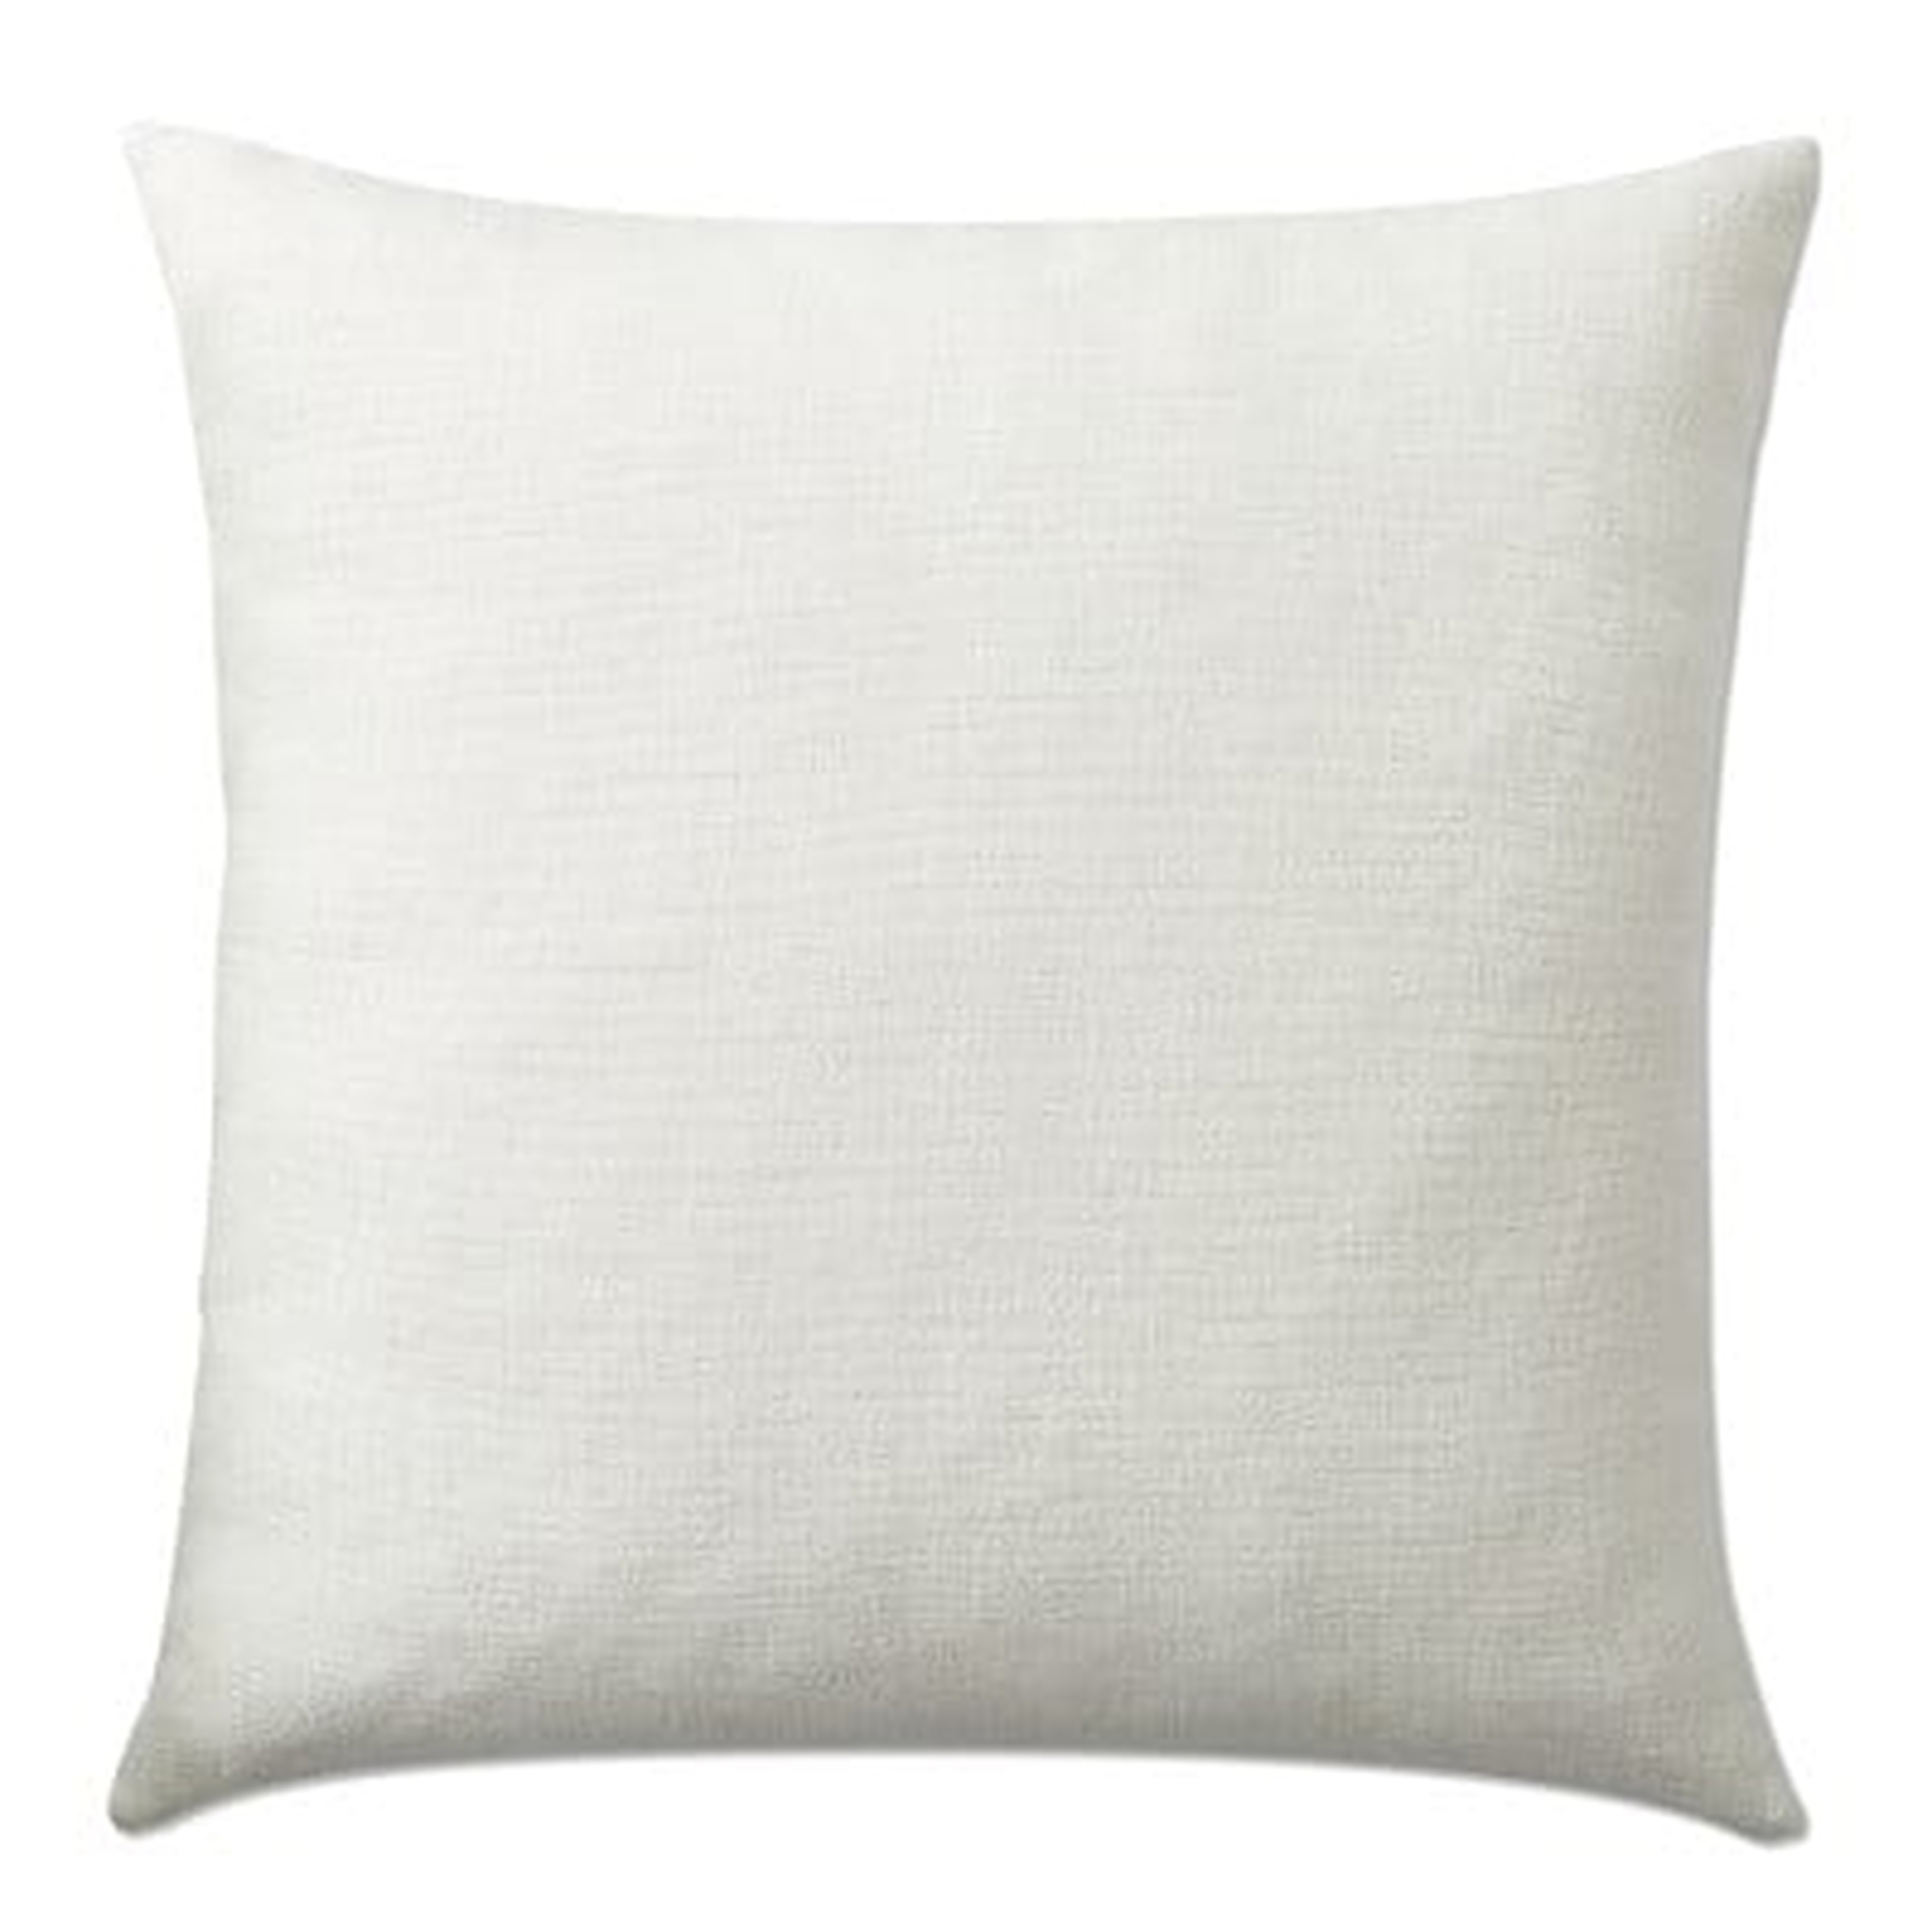 Reversible Belgian Linen Pillow Cover, 22" X 22",Oyster/Natural - Williams Sonoma